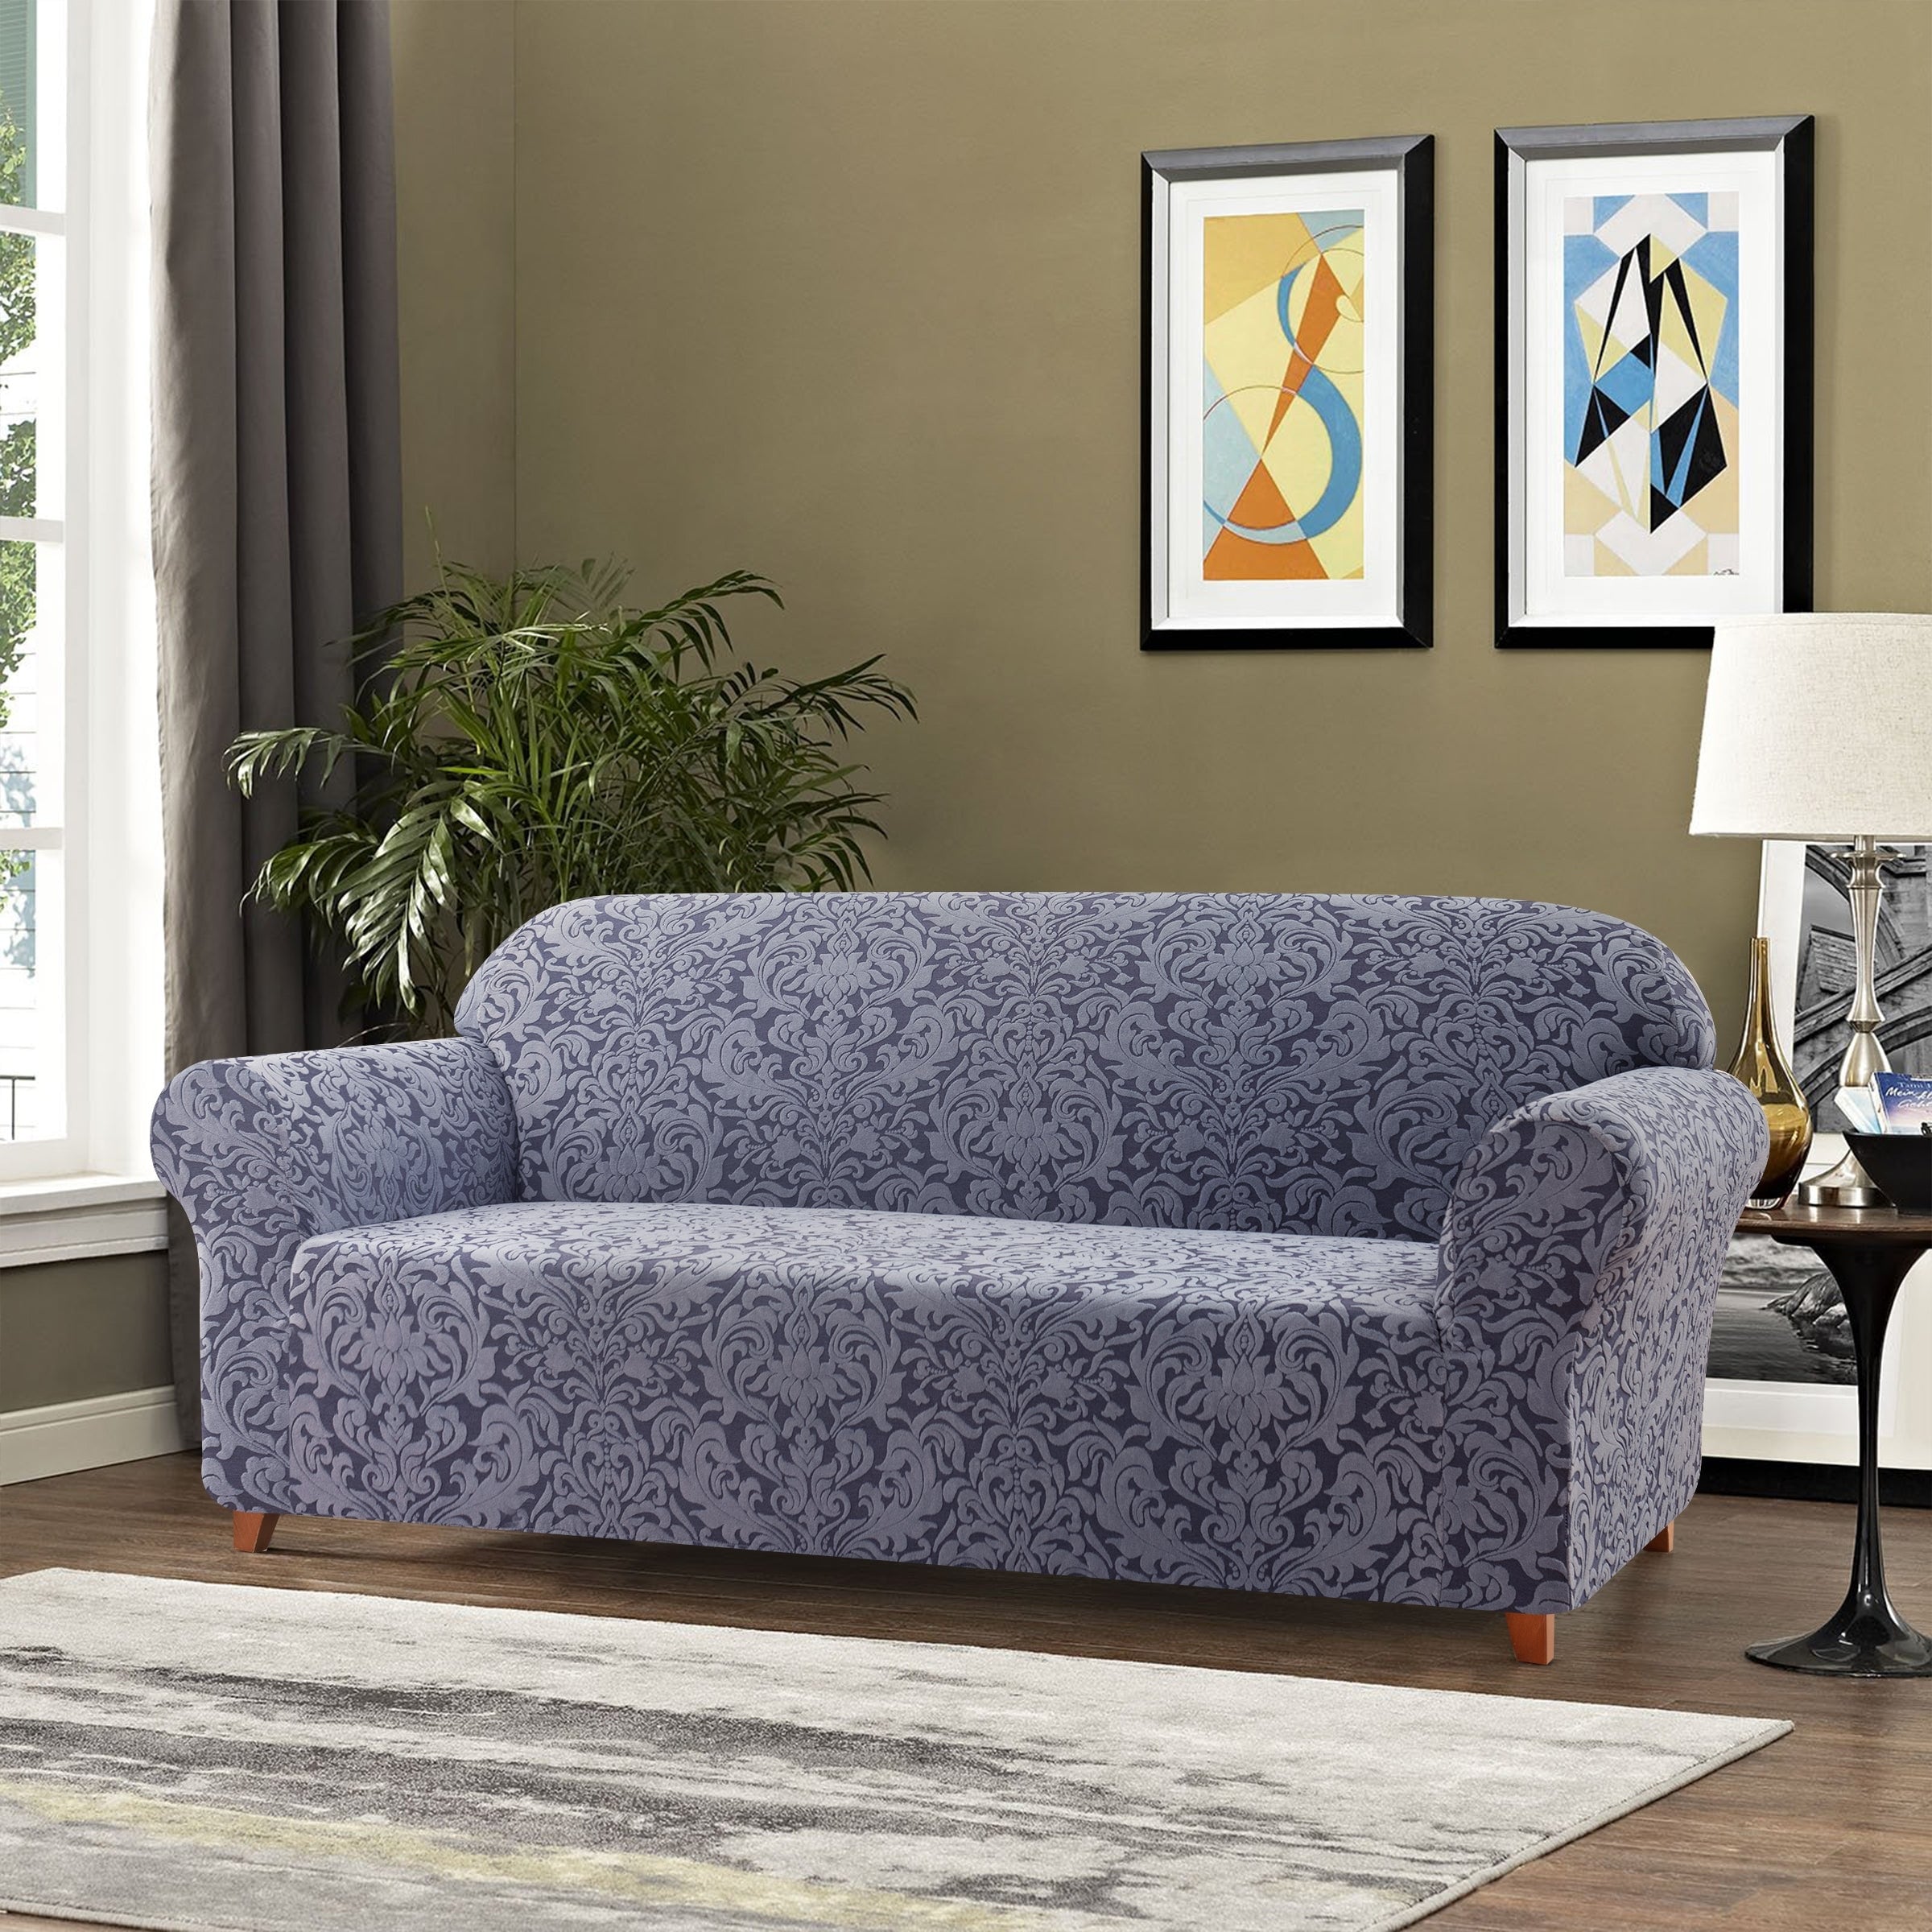 Subrtex Backrest Spandex Jacquard Couch Cover Stretch Back Cushion  Slipcover - On Sale - Bed Bath & Beyond - 34827146